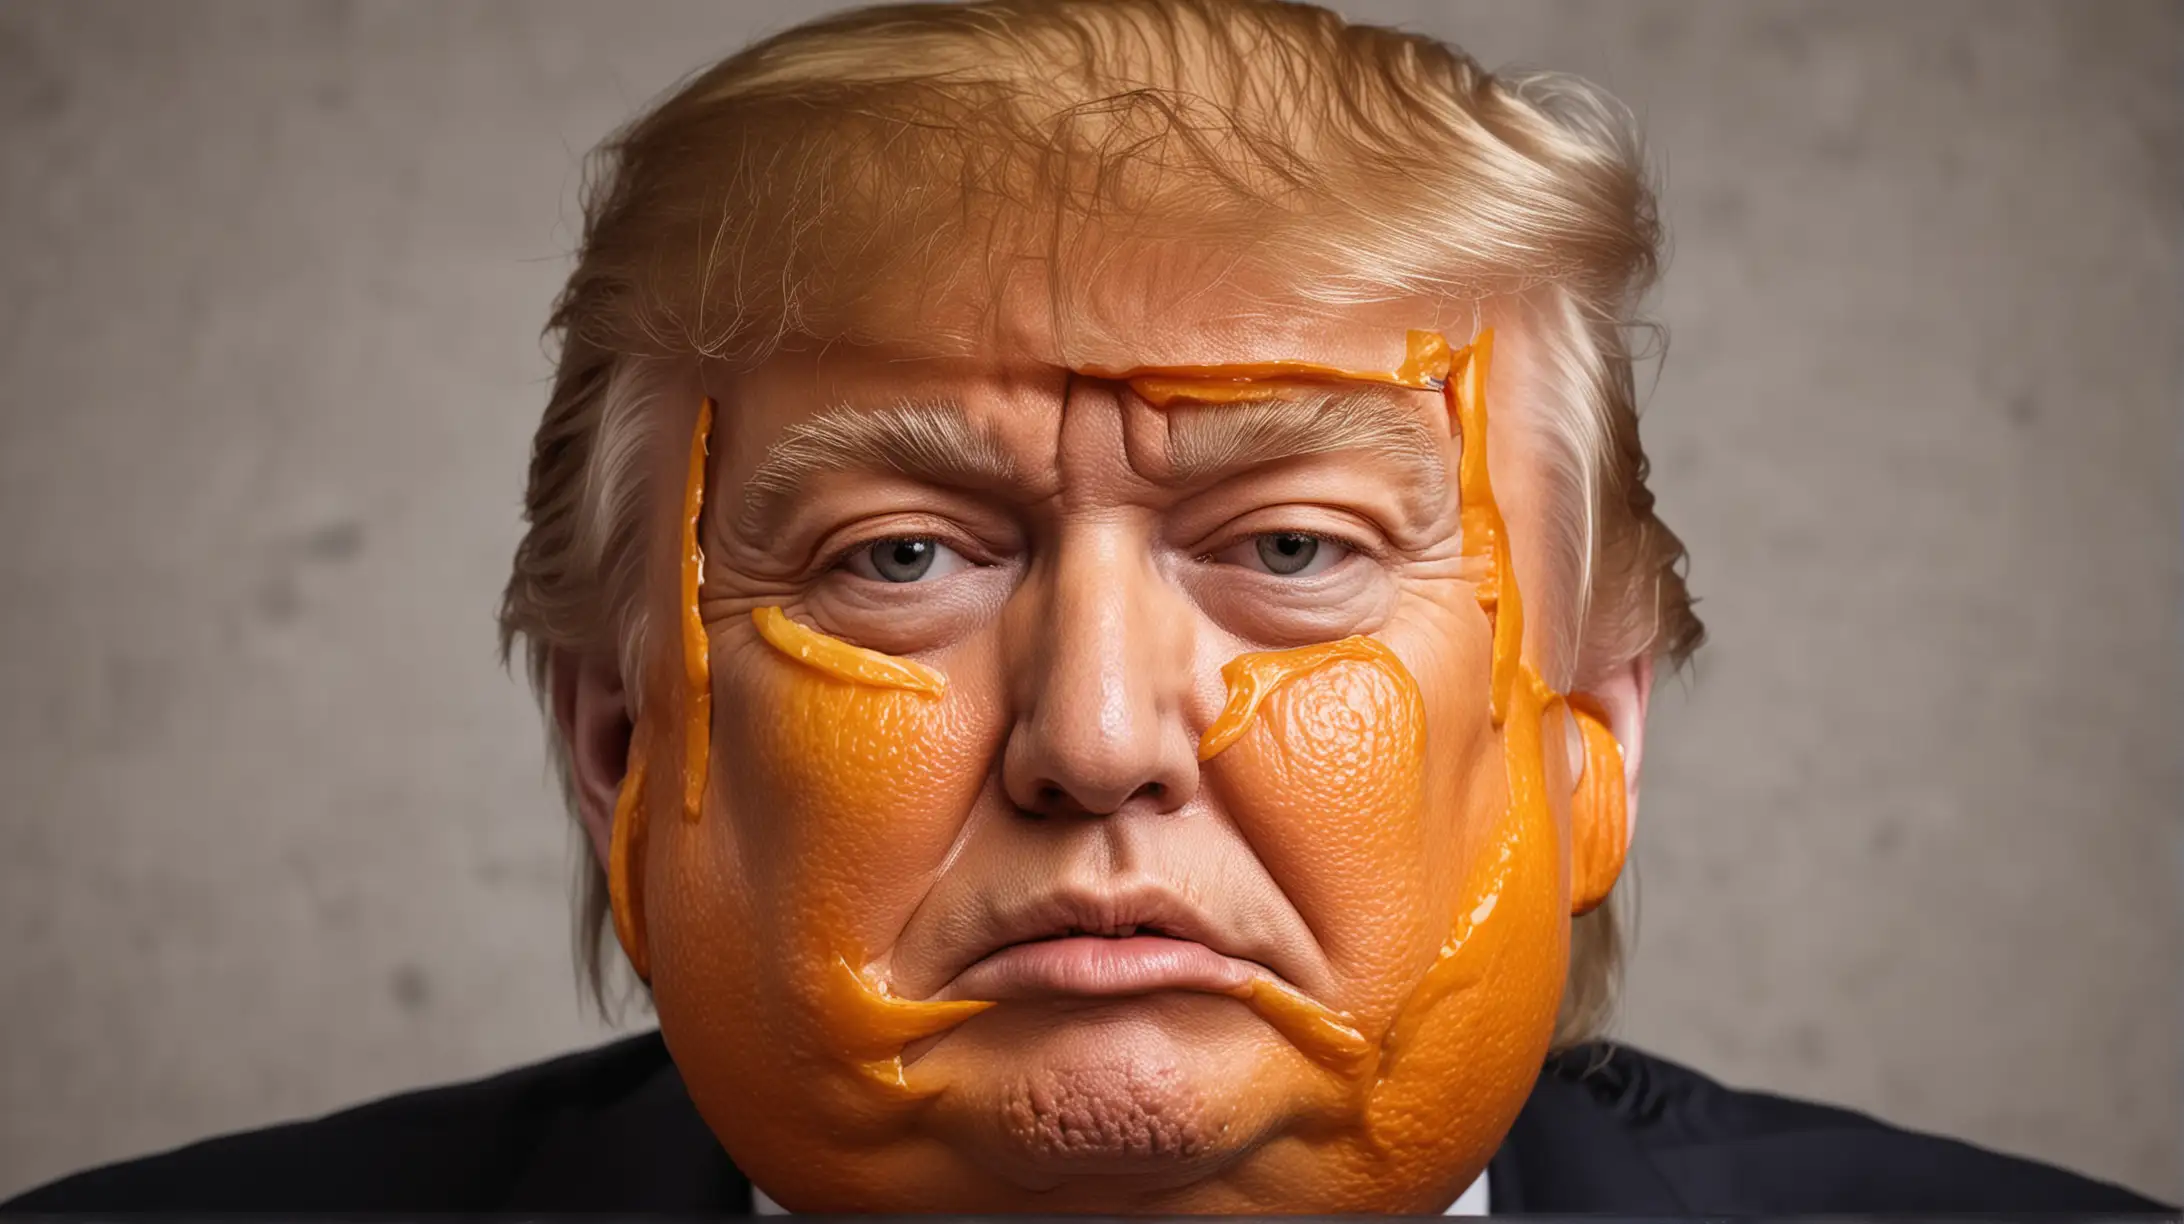 Squeezed Orange with a Caricature of Donald Trumps Face